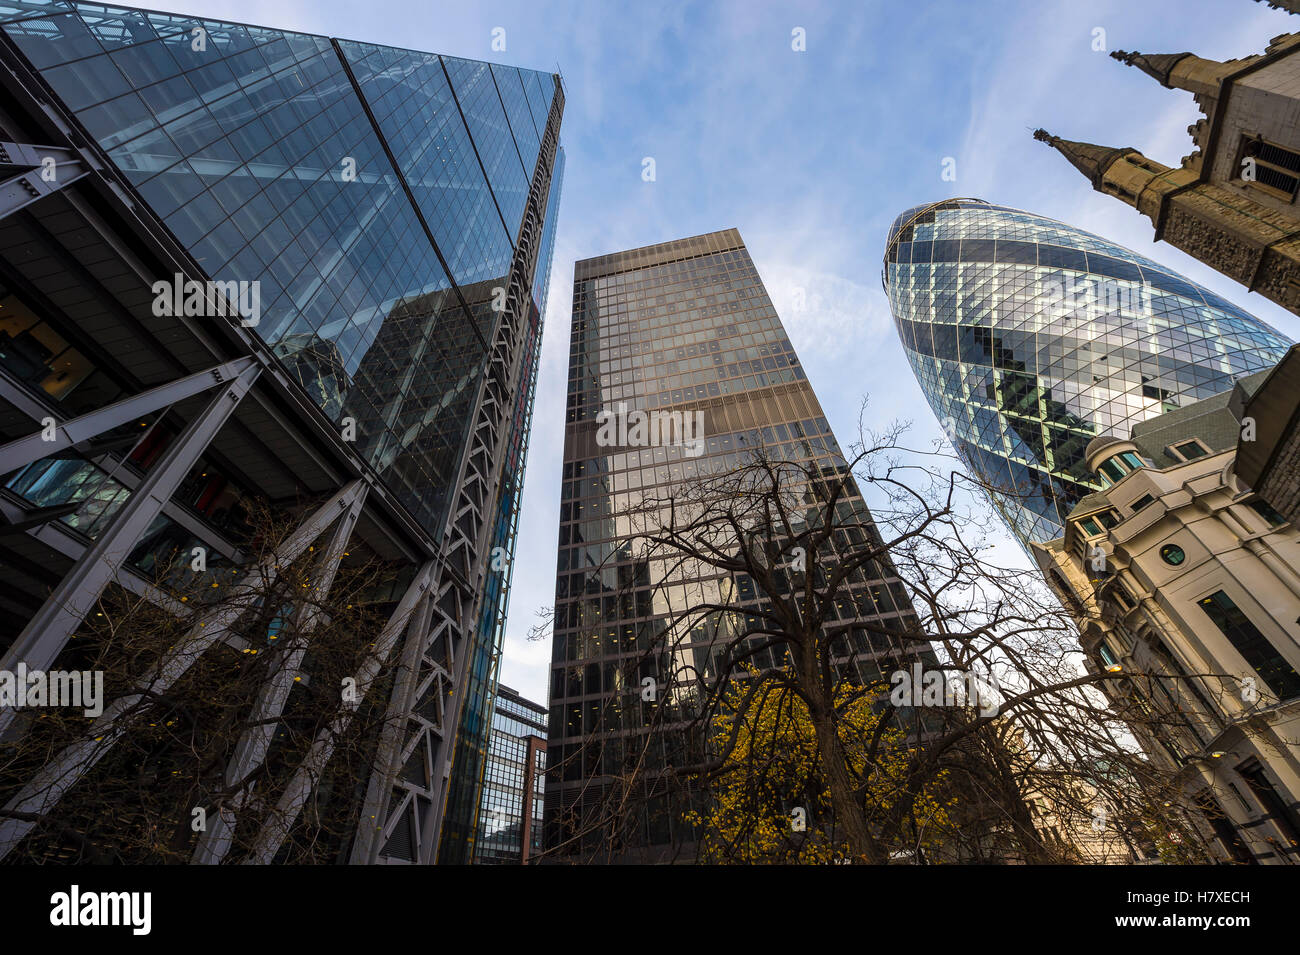 LONDON - NOVEMBER 3, 2016: The Cheesegrater and The Gherkin skyscrapers stand above the 16th century St Andrew Undershaft church Stock Photo